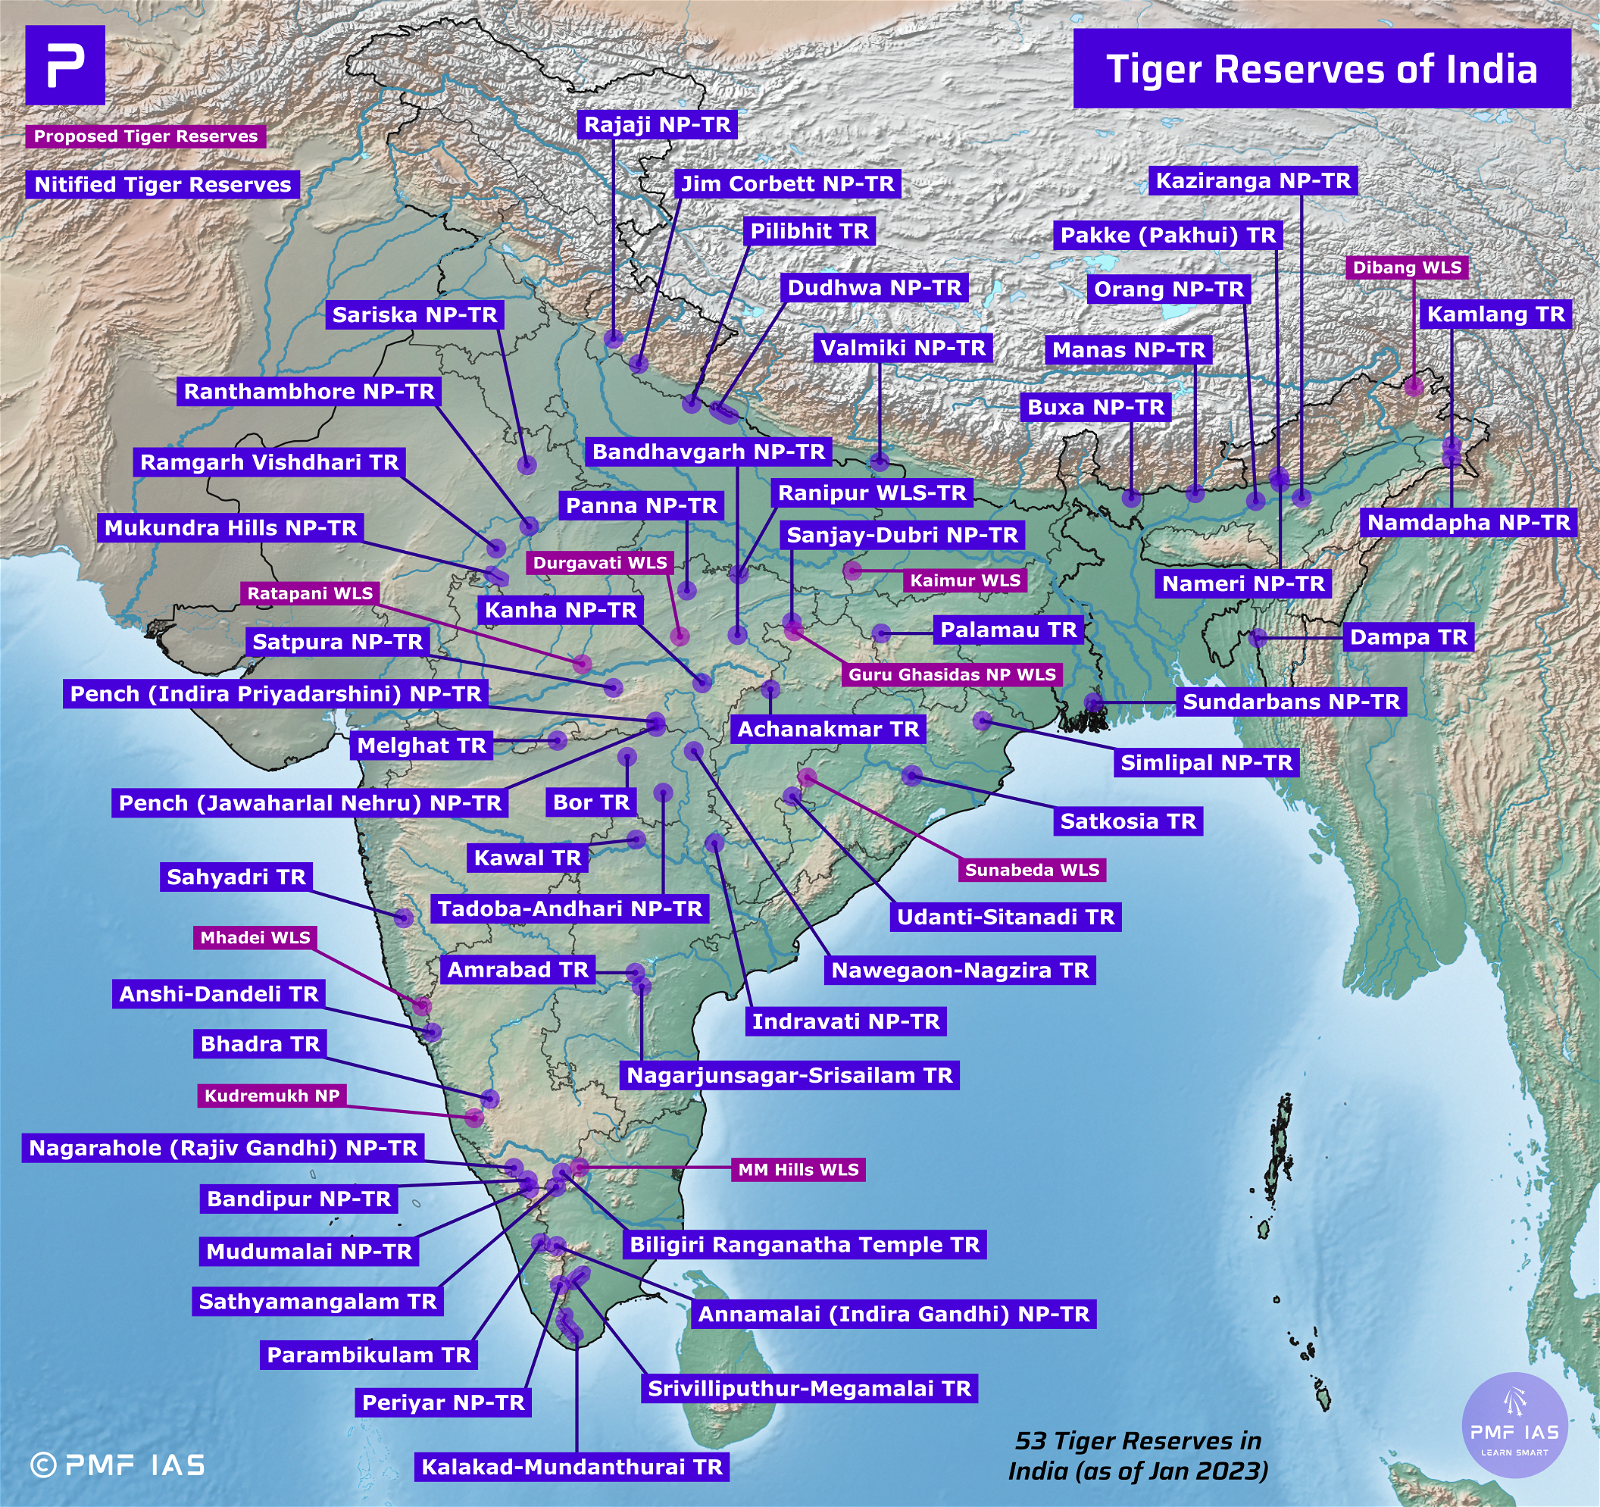 Tiger Reserves of India